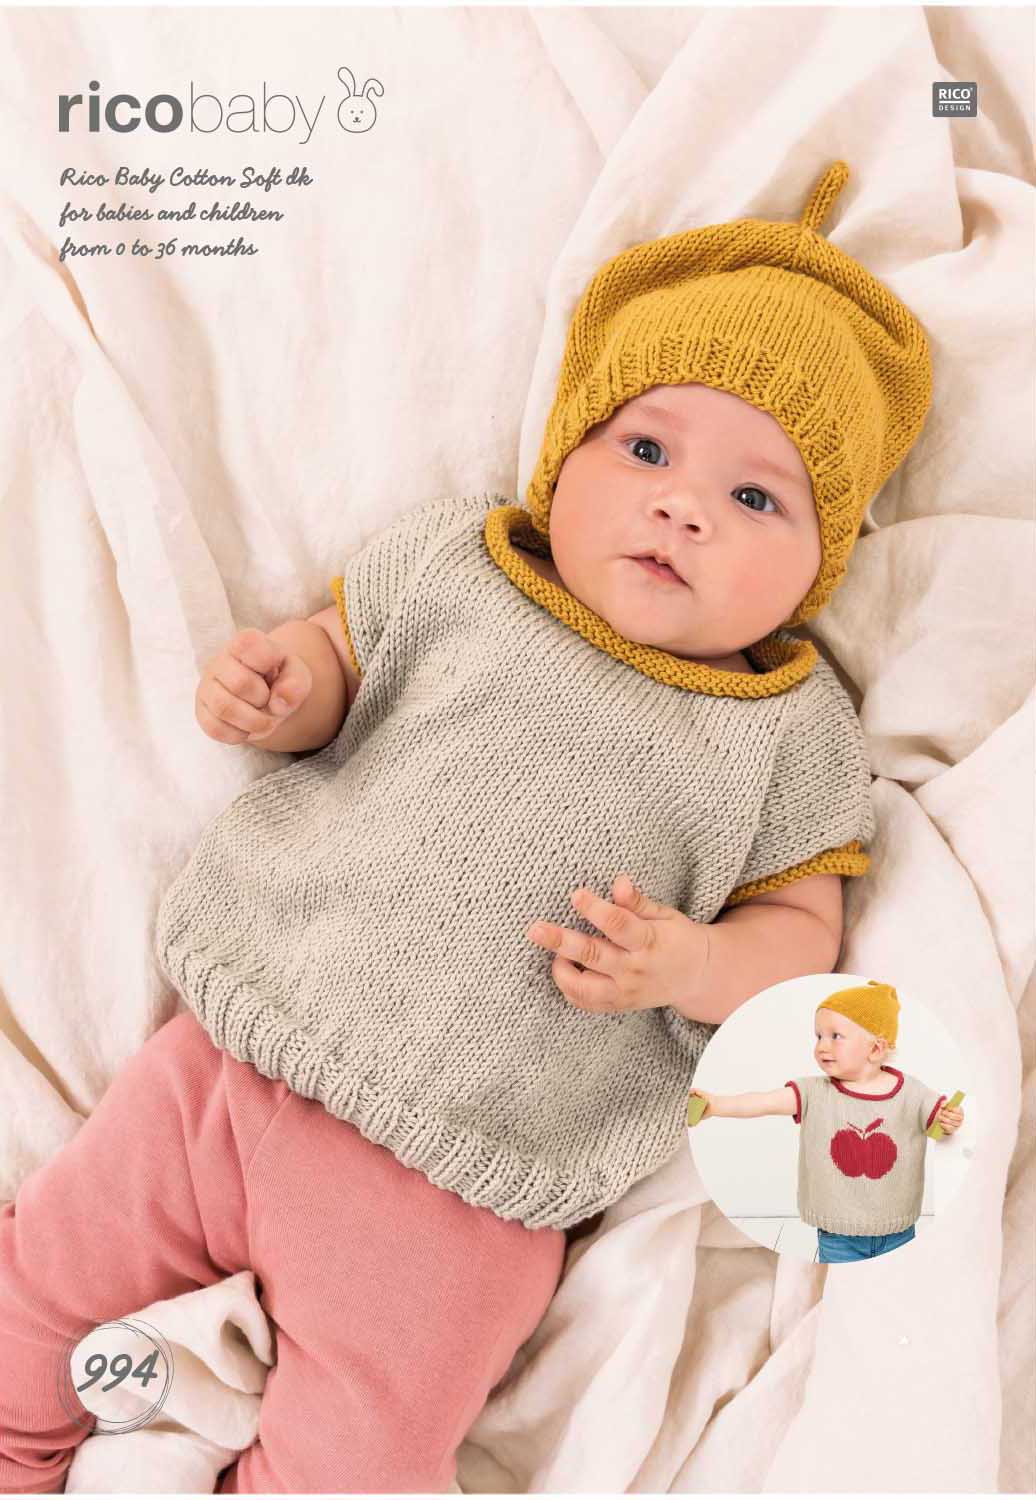 Rico Design Baby Cotton Soft DK - Oversized Shirt and Hat (994)